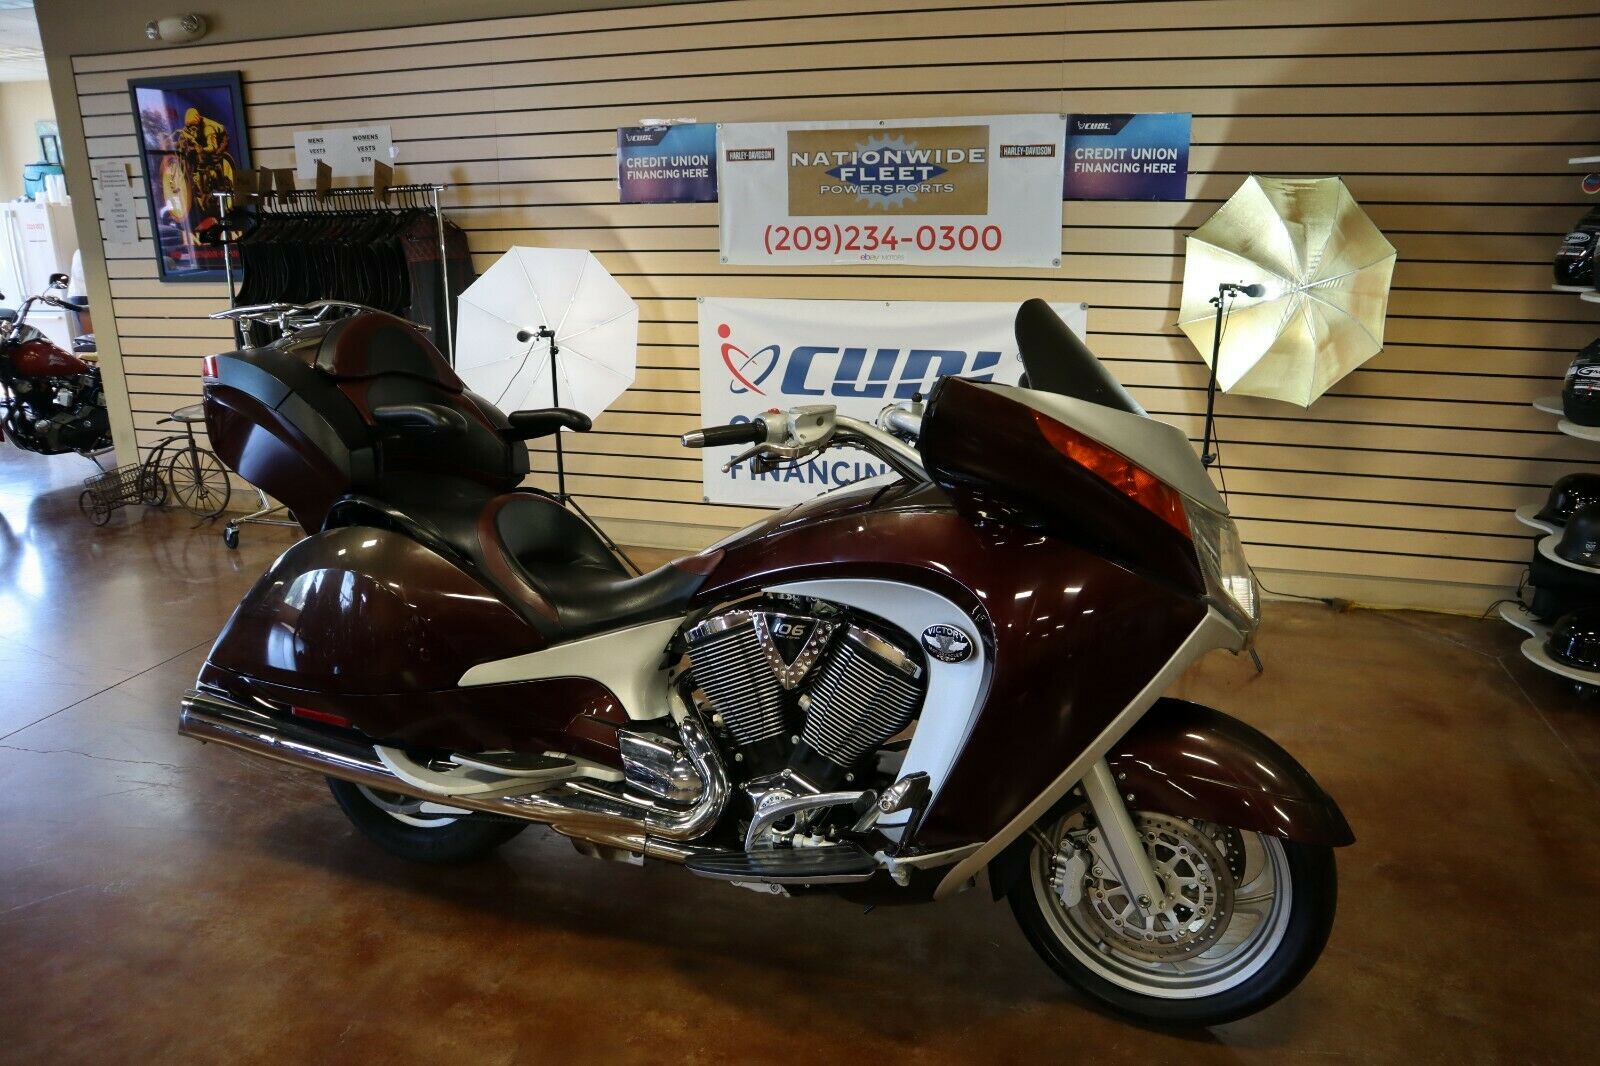 2009 Victory  2009 Victory Vision Touring Bagger 106 Cubic Inch 1731 Cc Clean Title Nice Bike